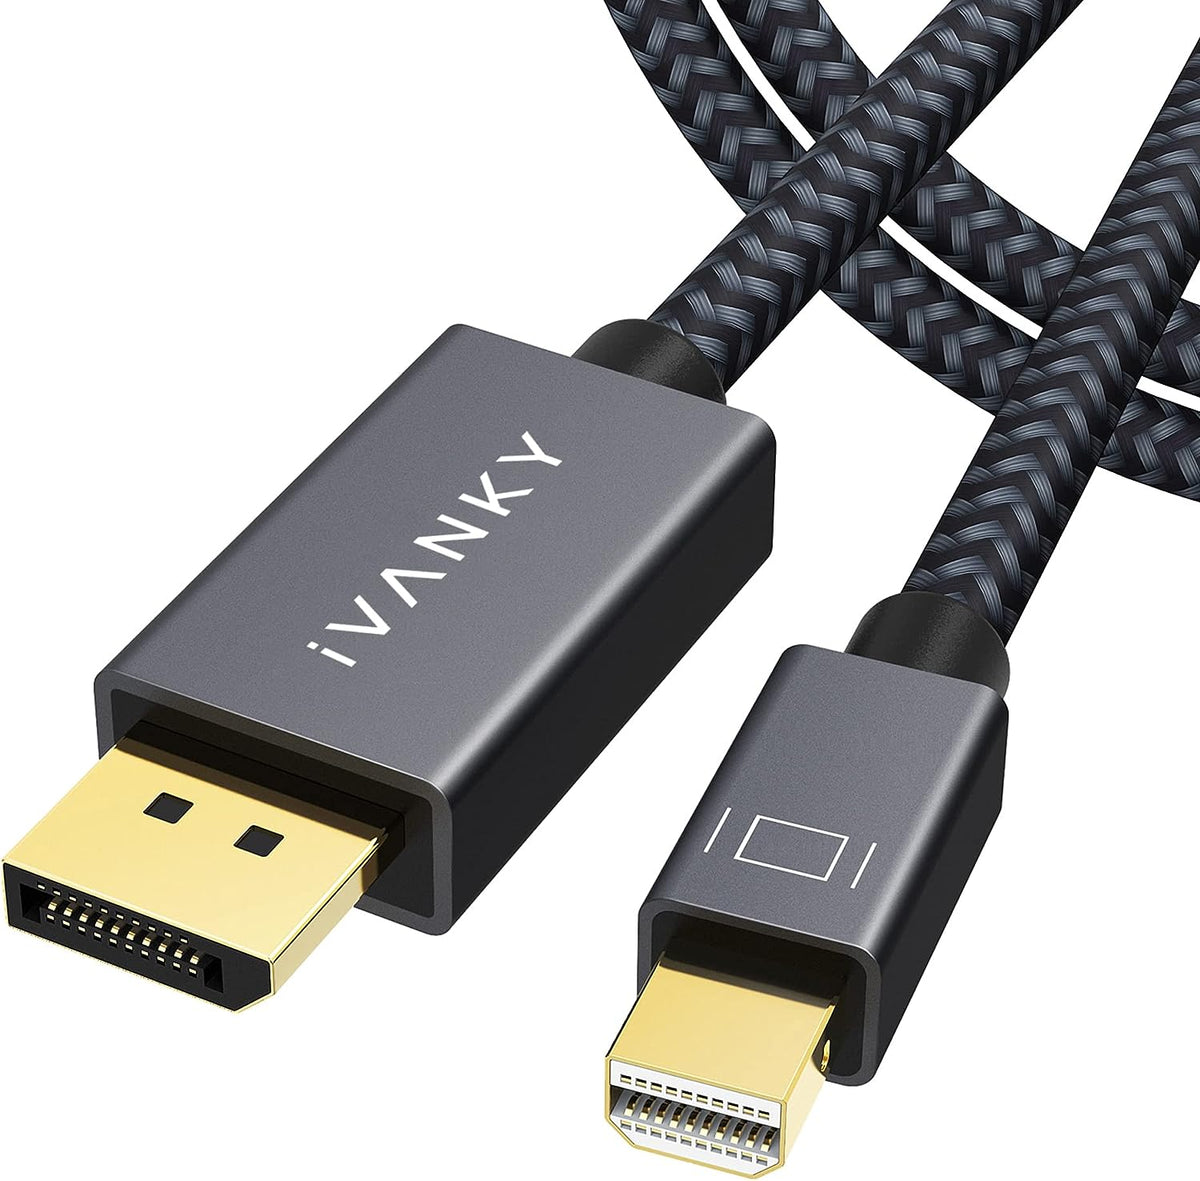  ULT-WIIQ 8K Mini DisplayPort to DisplayPort Cable 6.6ft, Mini DP  to DP 1.4 Cable, Support 8K@60Hz, 4K@144Hz, 2K@240Hz, Gold-Plated  Thunderbolt 2 to DP Cord for MacBook Air/Pro, Surface Pro, Monitor 